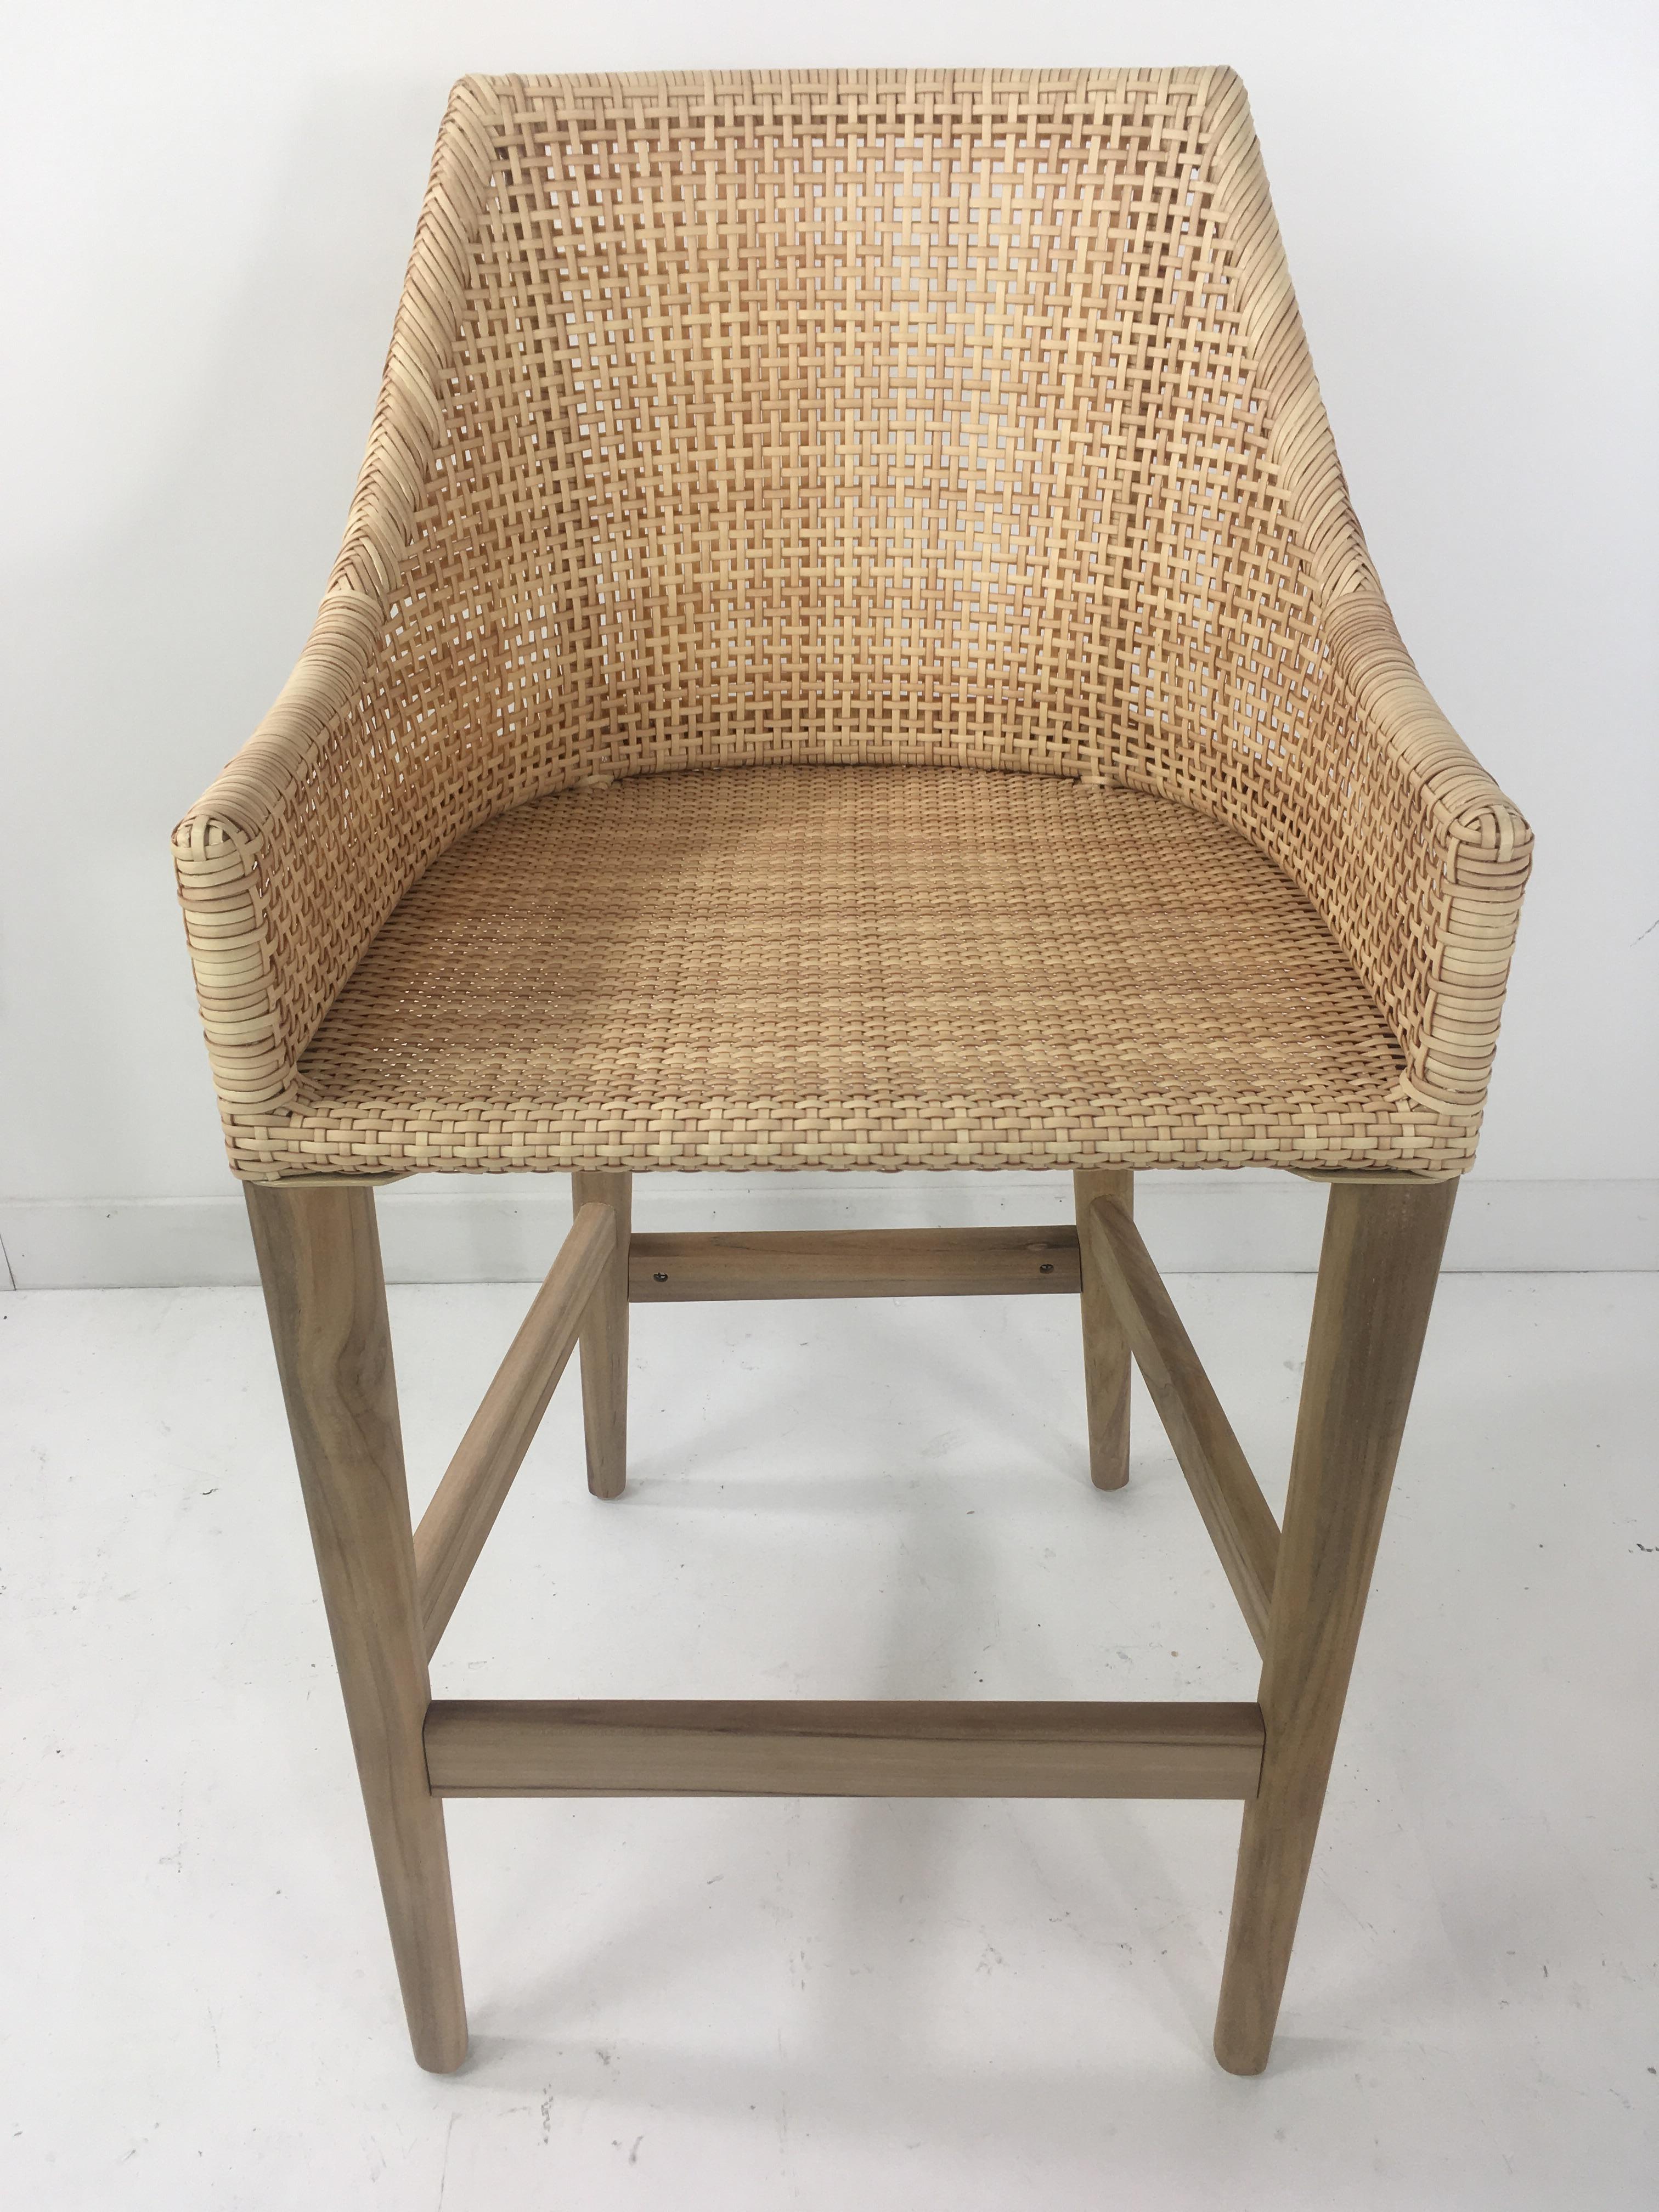 Teak Wooden and Braided Resin Rattan Effect Outdoor Bar Stool For Sale 8